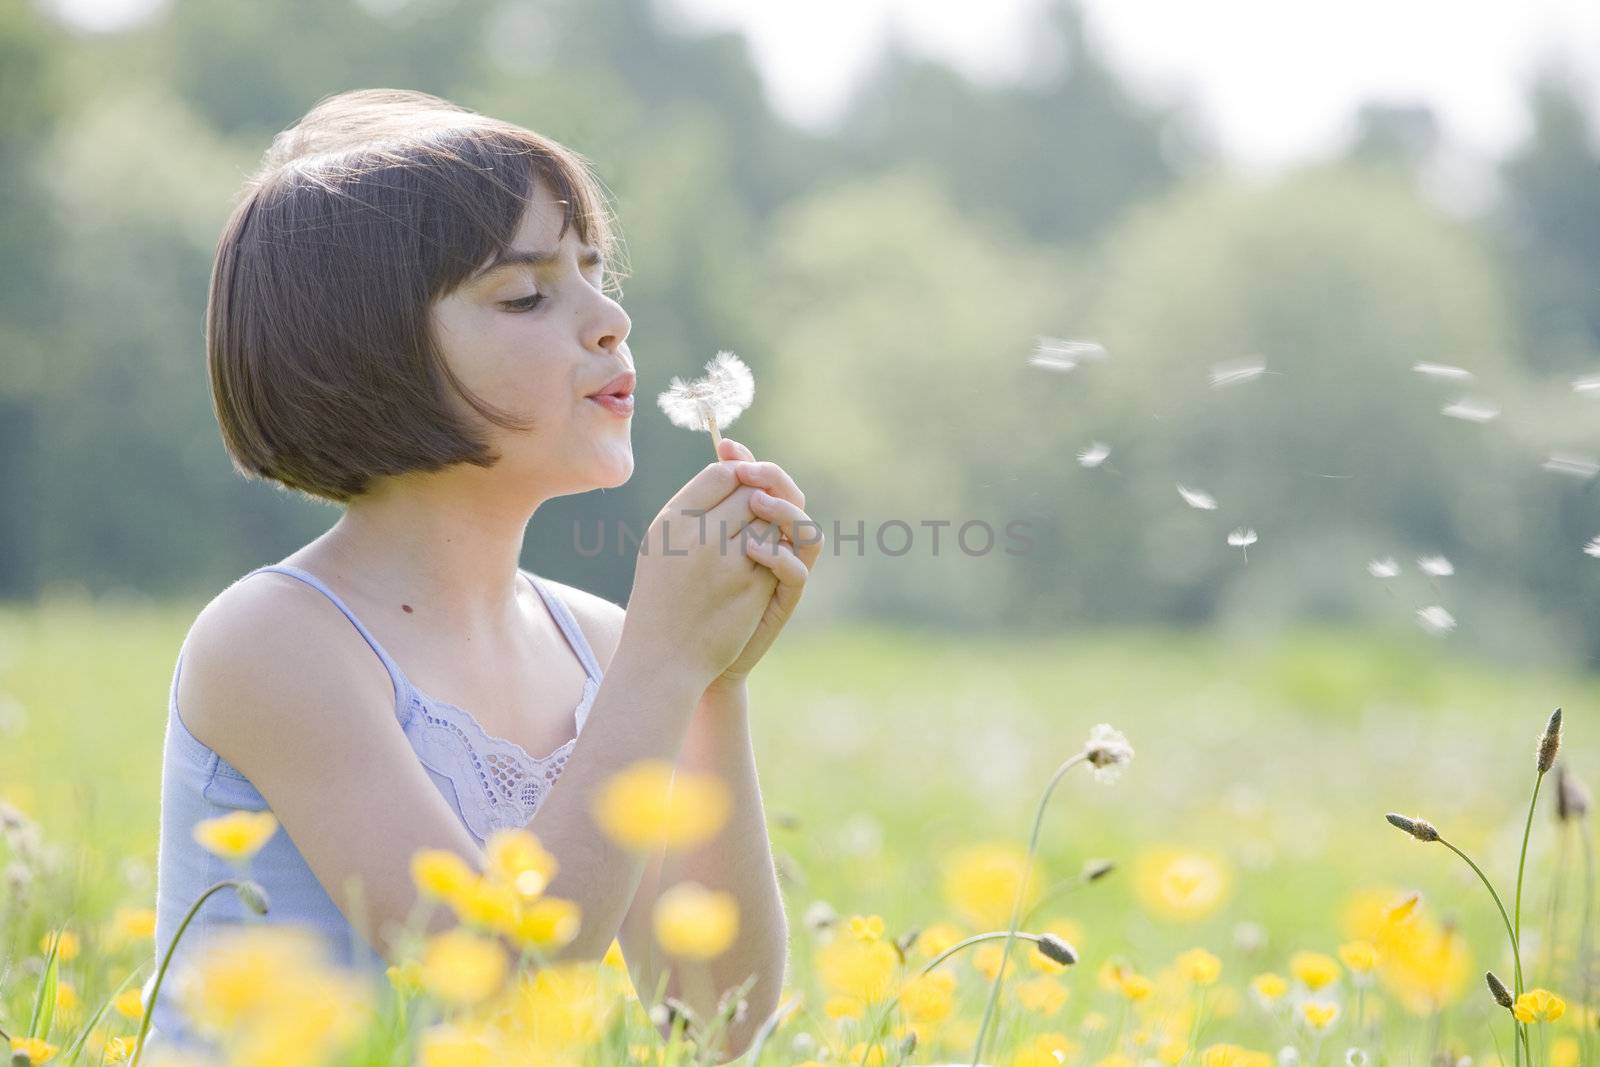 child blowing dandelion2956 by gemphotography